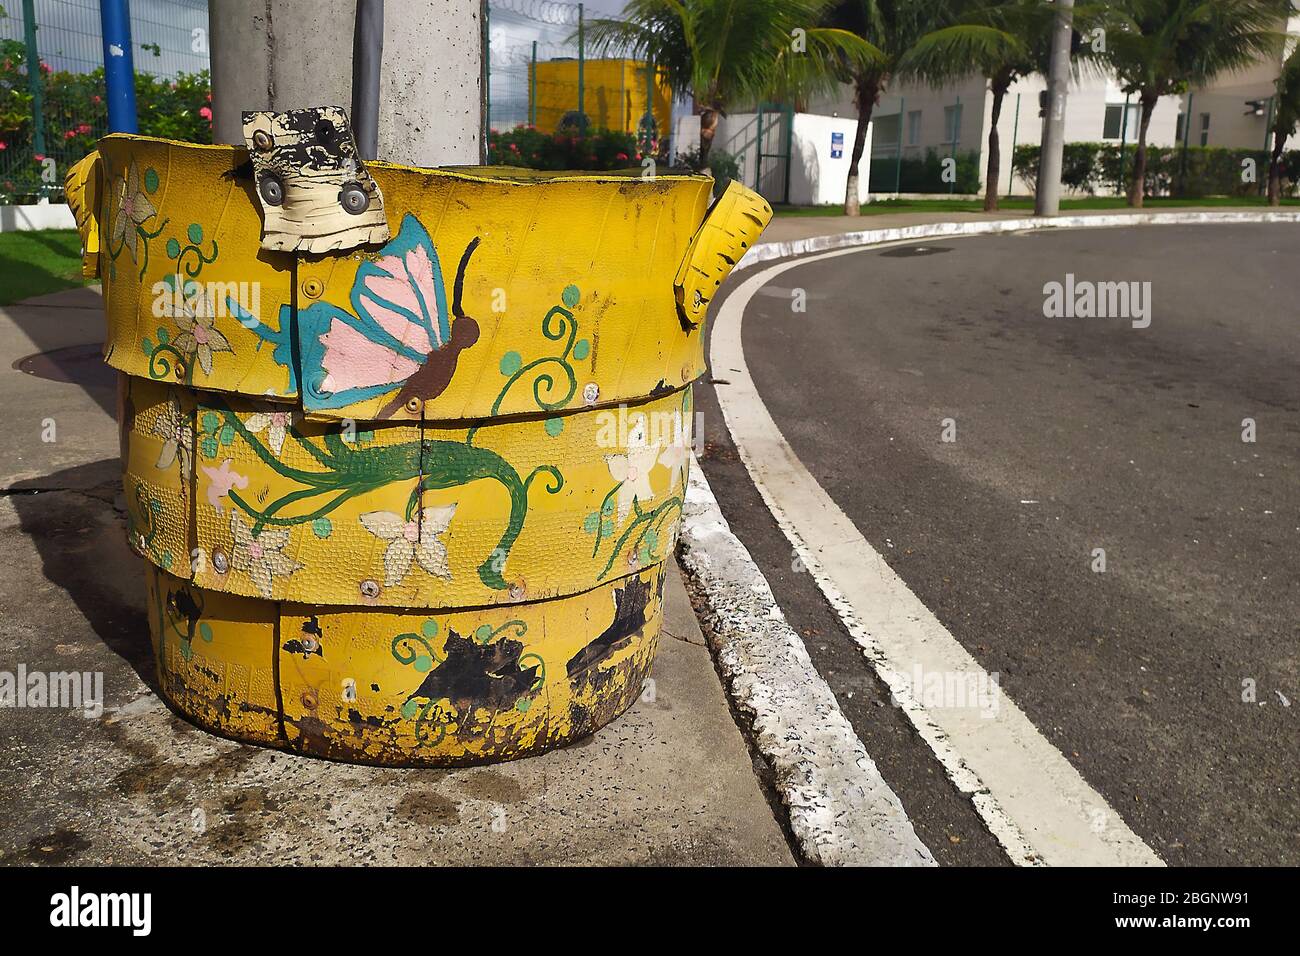 Salvador; Bahia; Brazil. 04/22/2020. Yellow and recyclable waste basket decorated with nature motifs (Borboleta) on a public street in the city of Sal Stock Photo